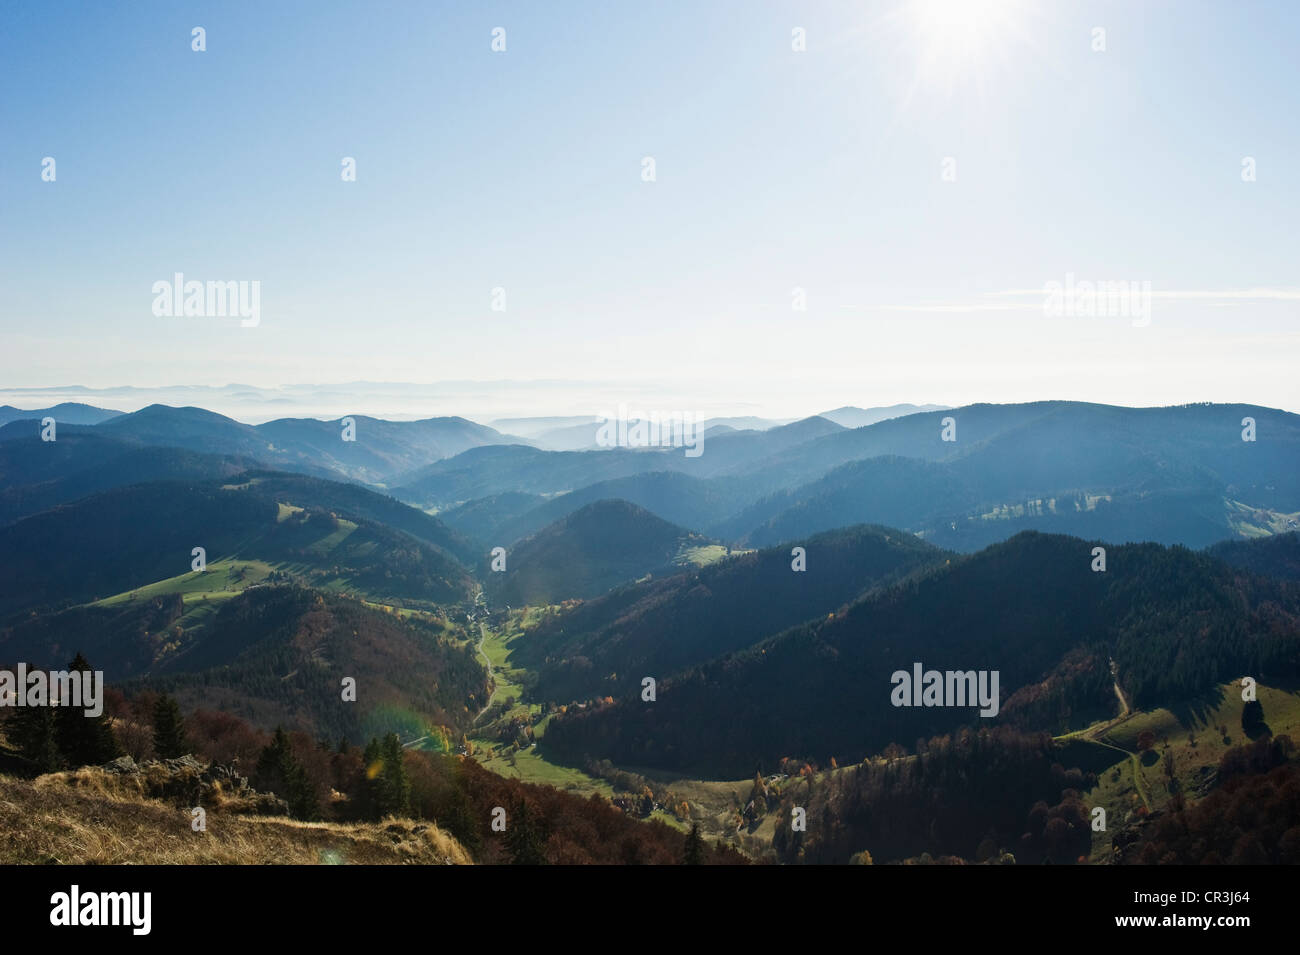 View from Mt Belchen to the south, Southern Black Forest, Black Forest, Baden-Wuerttemberg, Germany, Europe Stock Photo